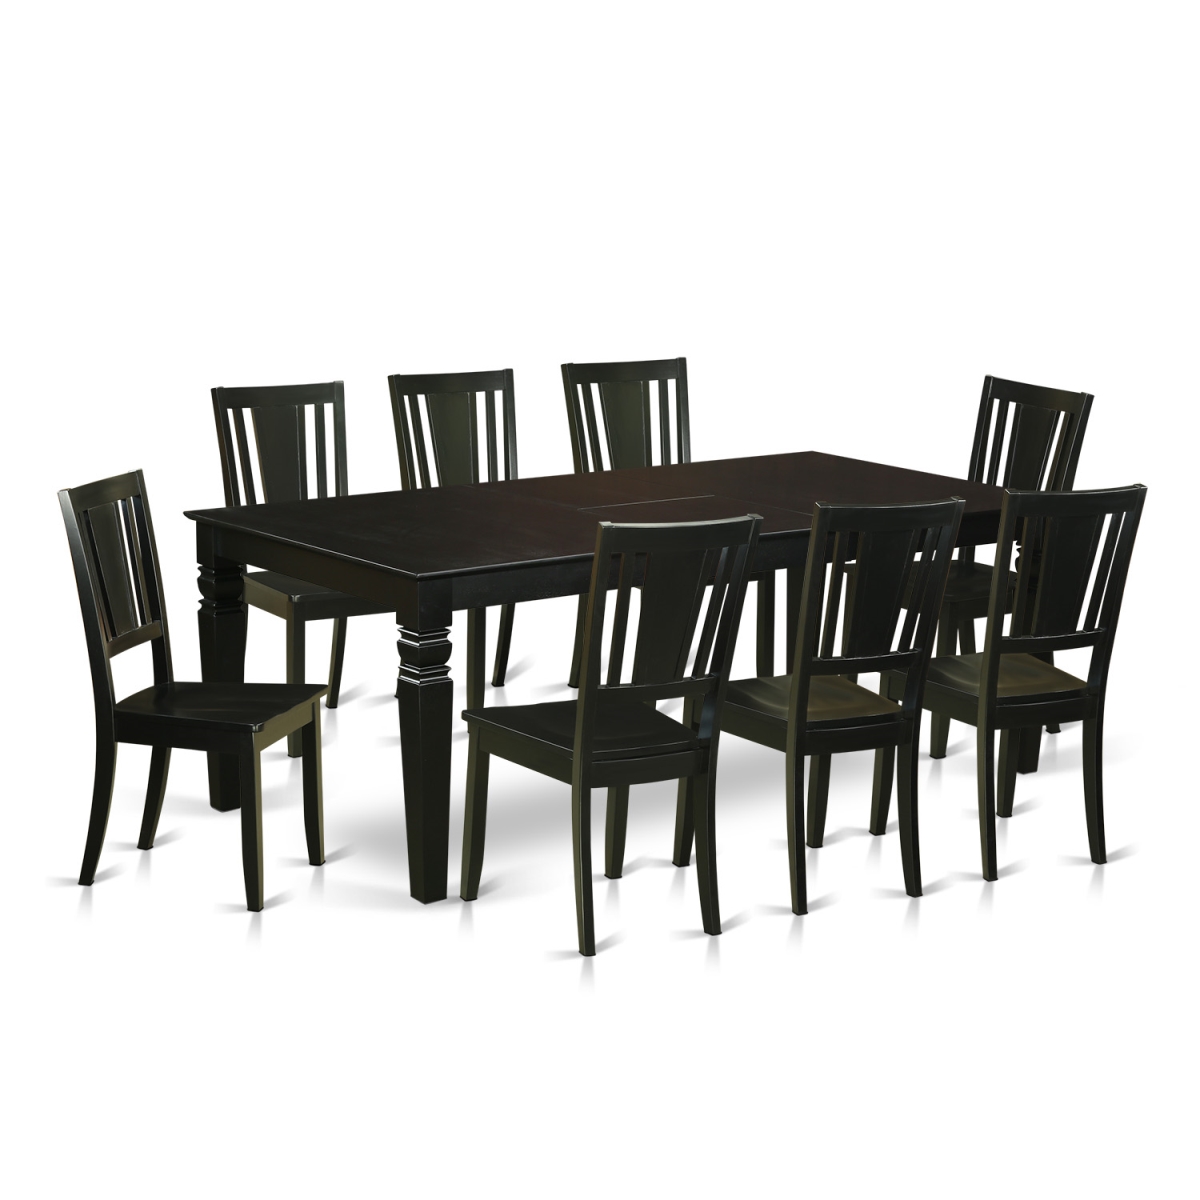 Lgdu9-blk-w Dinette Set With A Single Logan Table & 8 Solid Wood Chairs, Luxurious Black - 9 Piece